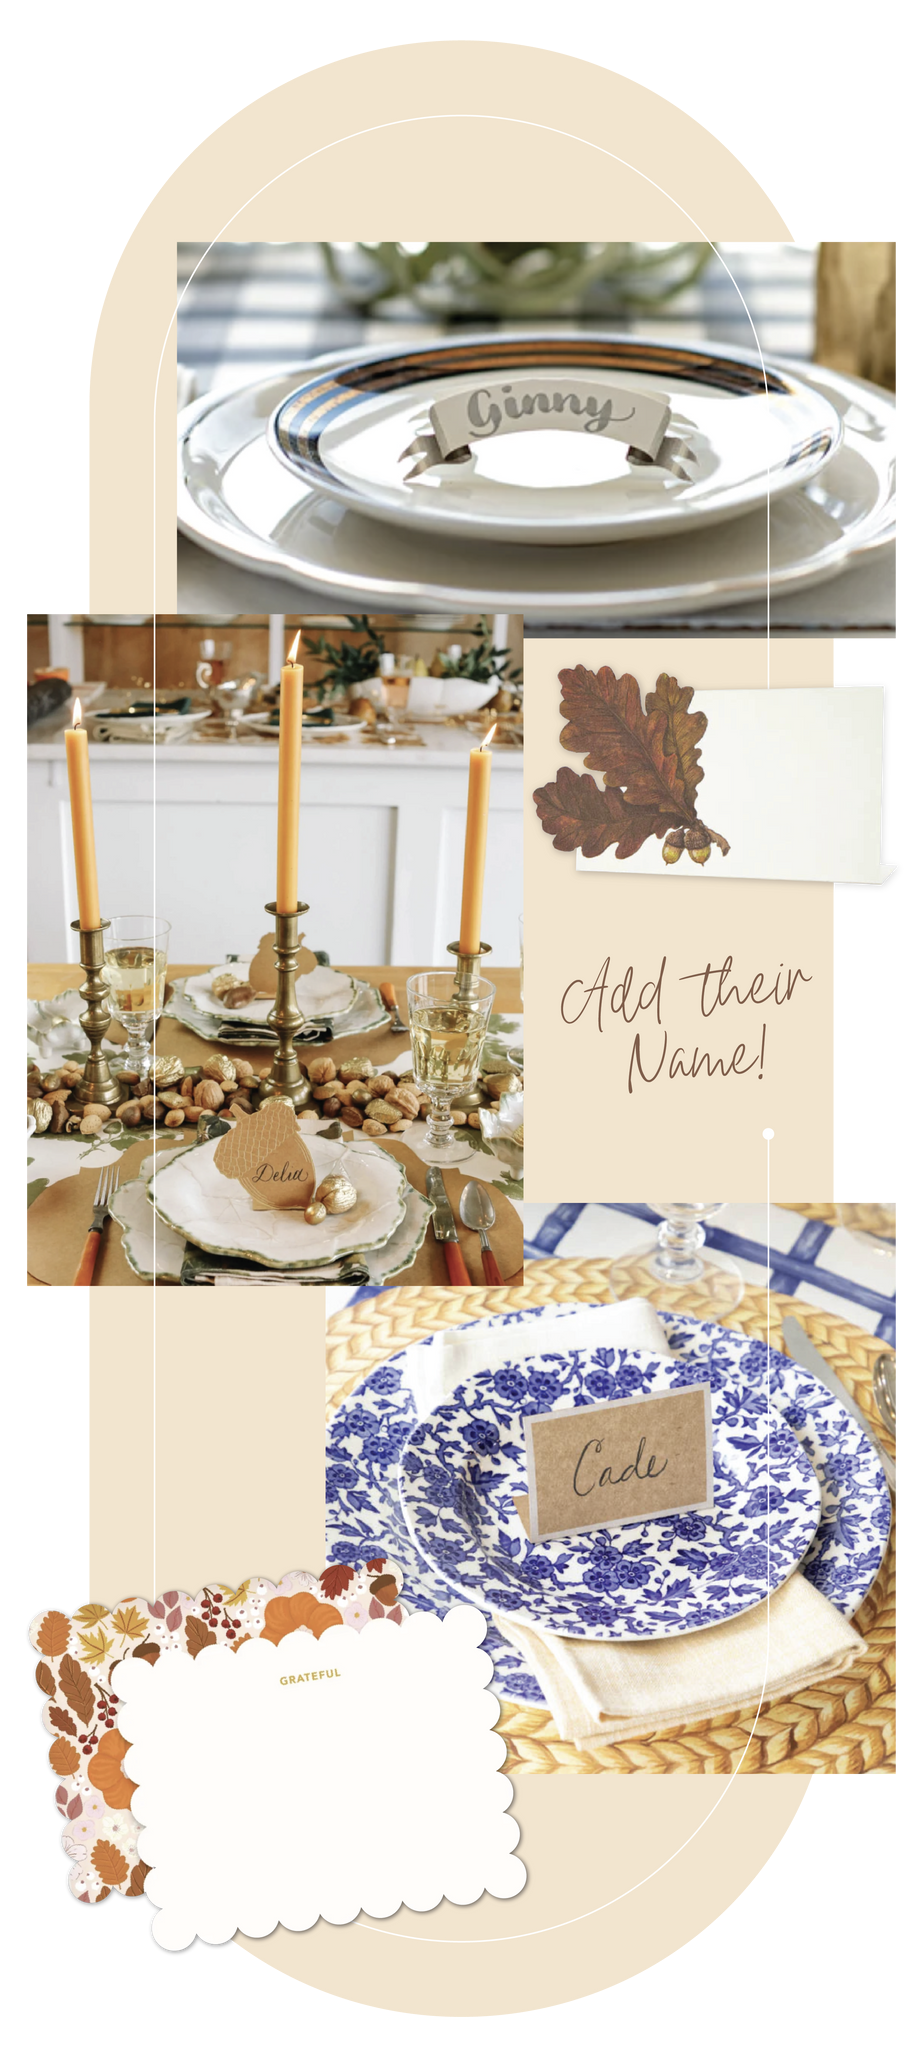 urbanic paper boutique los angeles california gifts stationery holiday holidays thanksgiving table setting place cards plates candles leaves acorns grateful